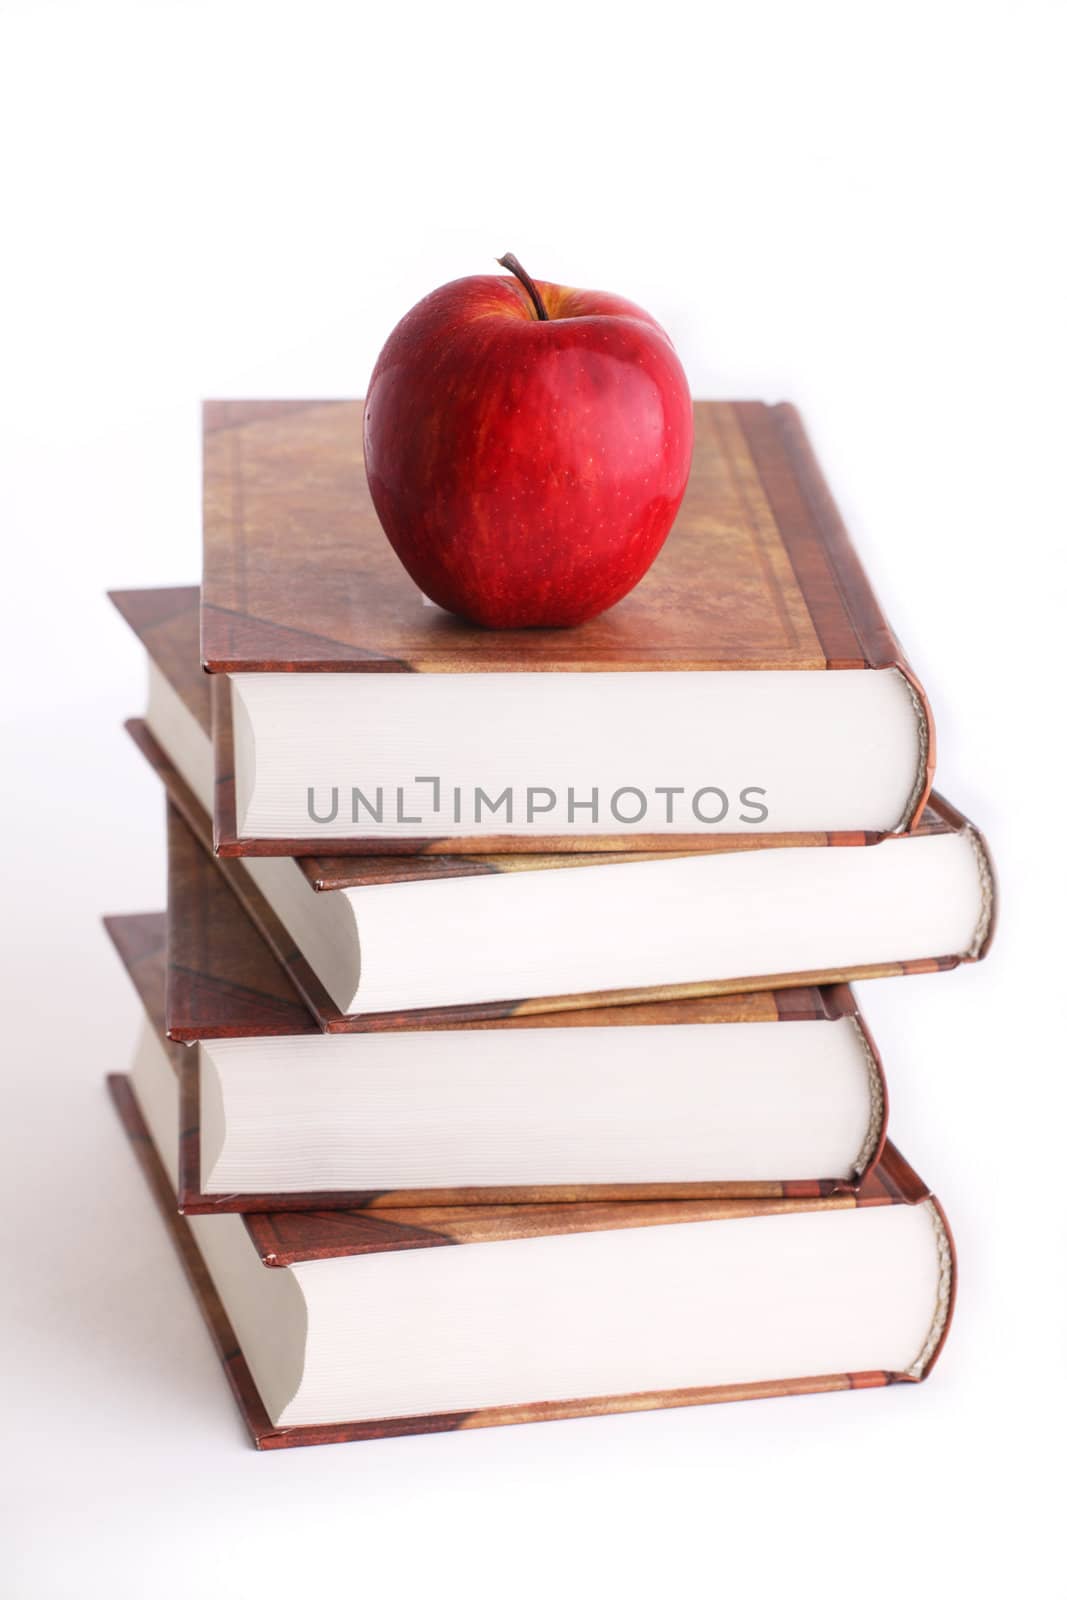 Red apple on the stack of the books on white background